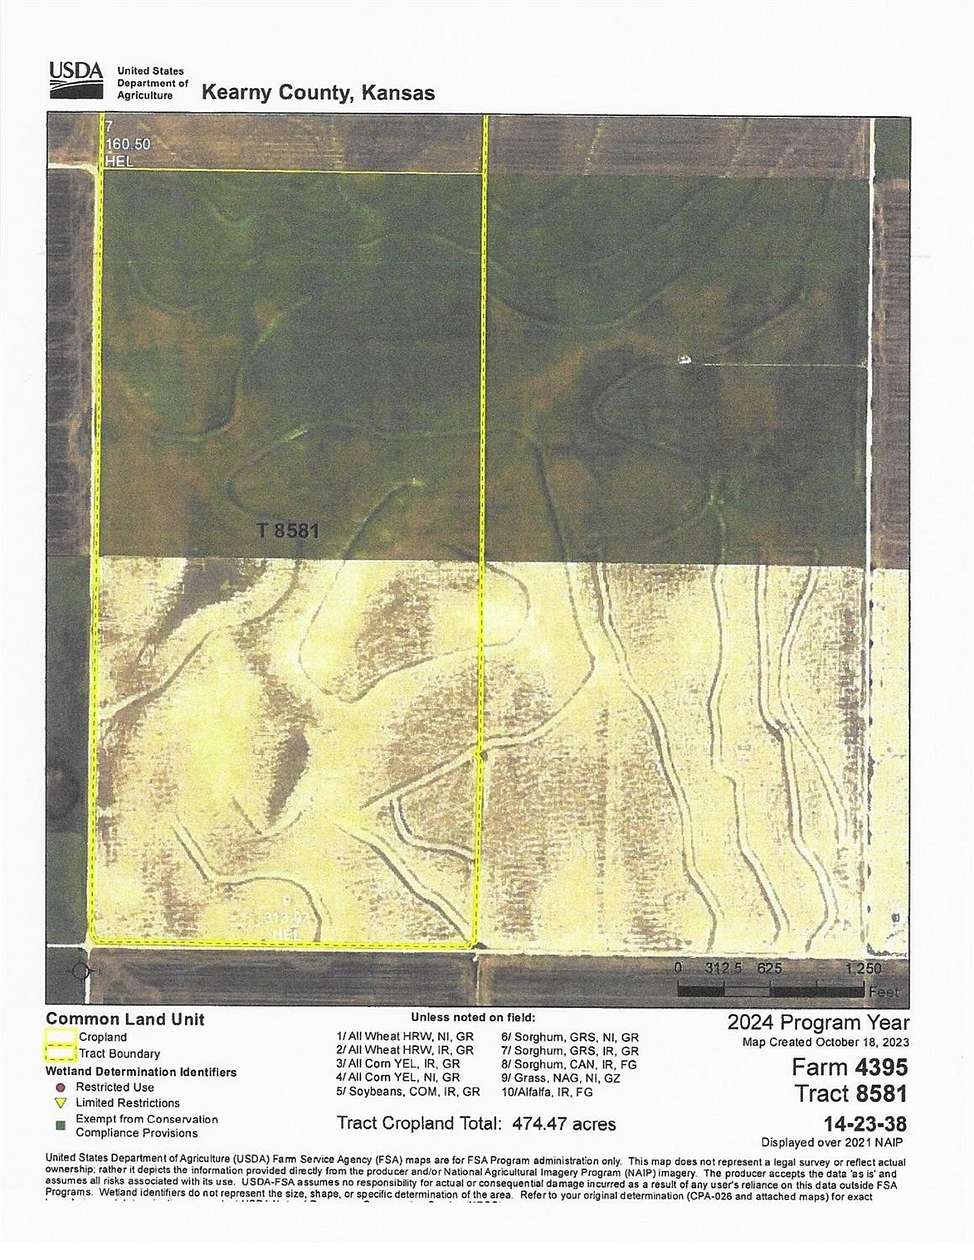 320 Acres of Land for Sale in Lakin, Kansas